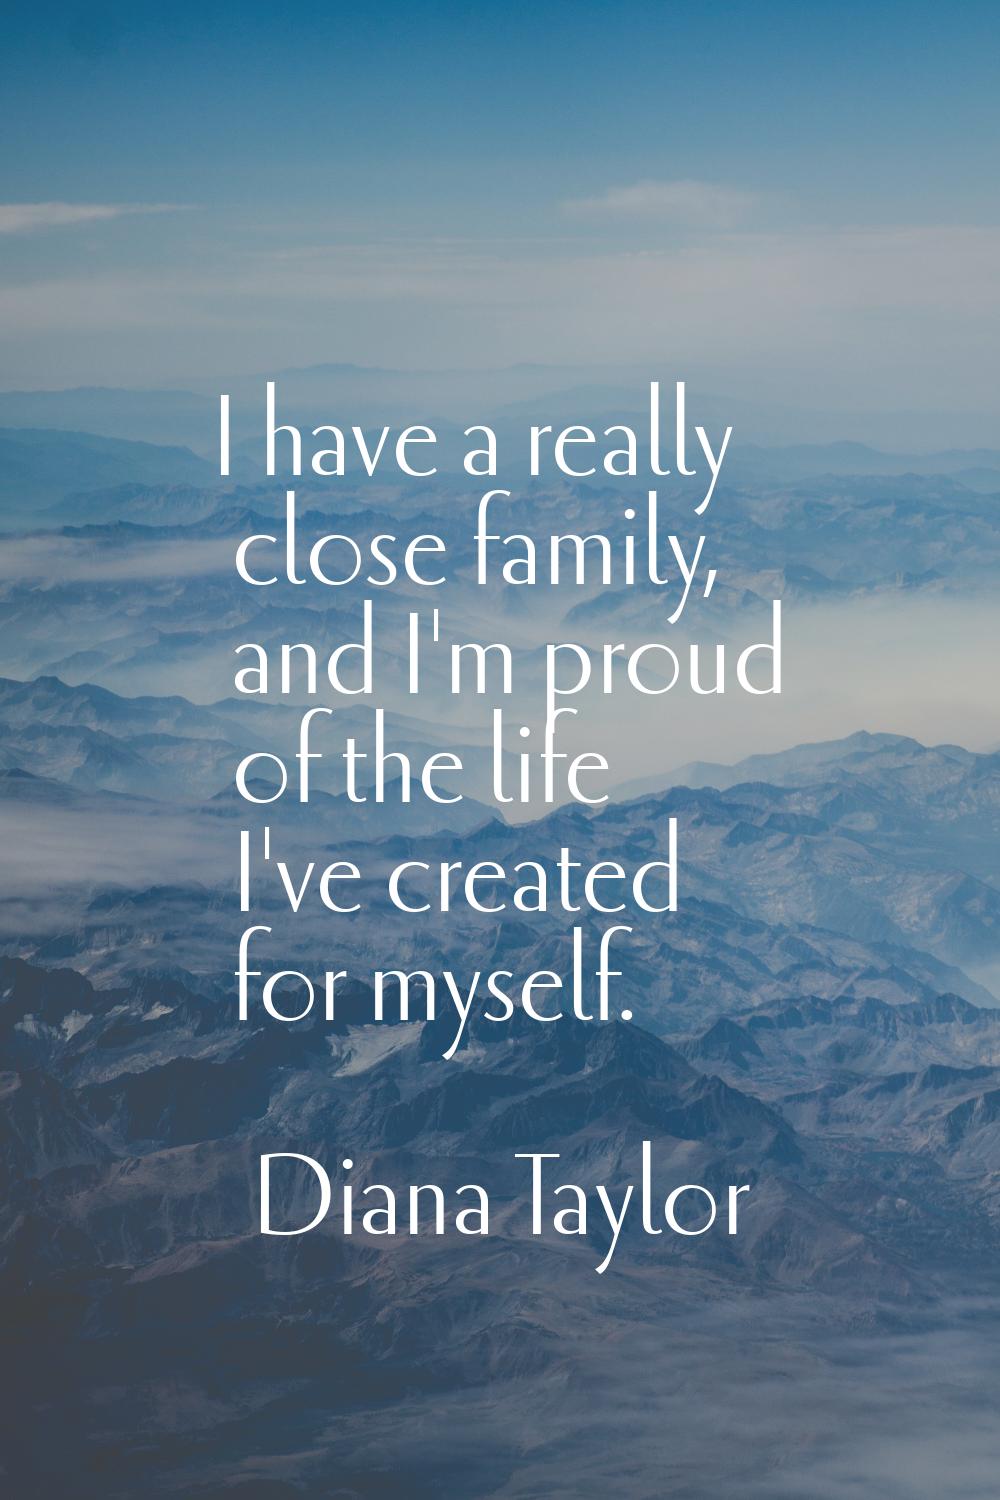 I have a really close family, and I'm proud of the life I've created for myself.